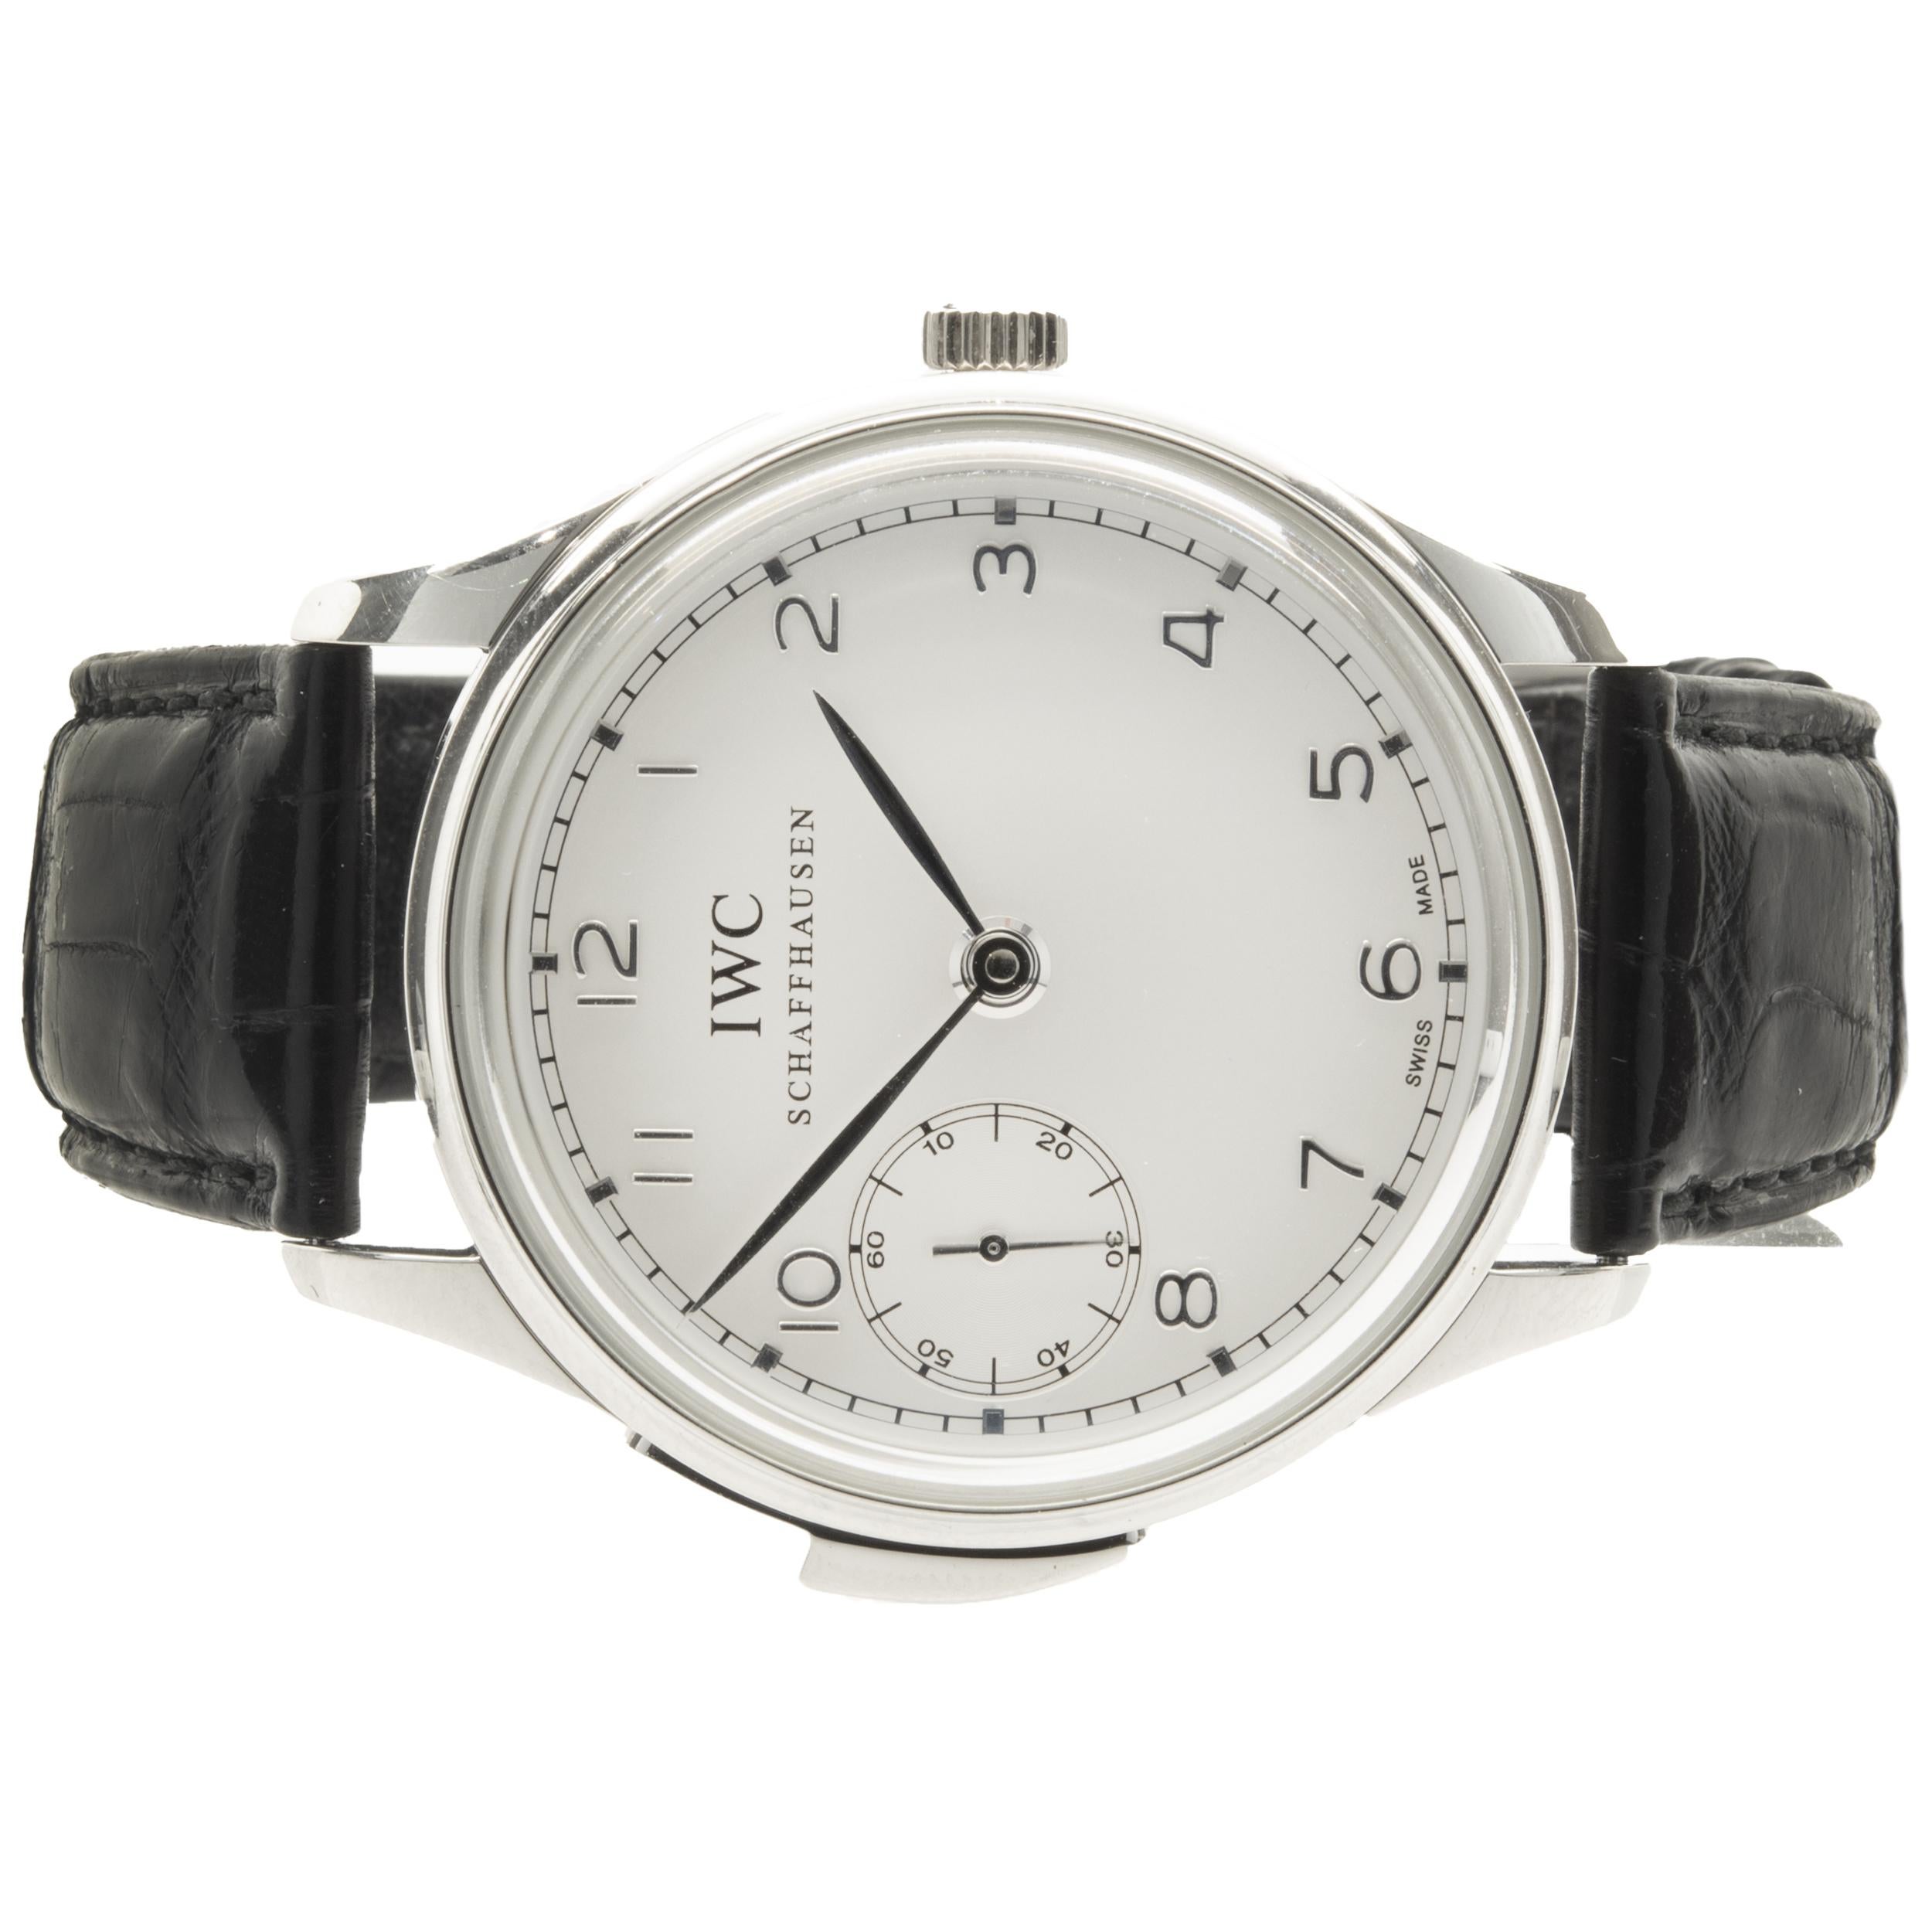 Brand: IWC
Movement: manual
Function: hour, minutes, seconds, minute repeater
Case: 42mm platinum round case, sapphire crystal
Band: black crocodile strap, integrated clasp
Dial: silver arabic dial
Reference #: IW5242
Serial #: